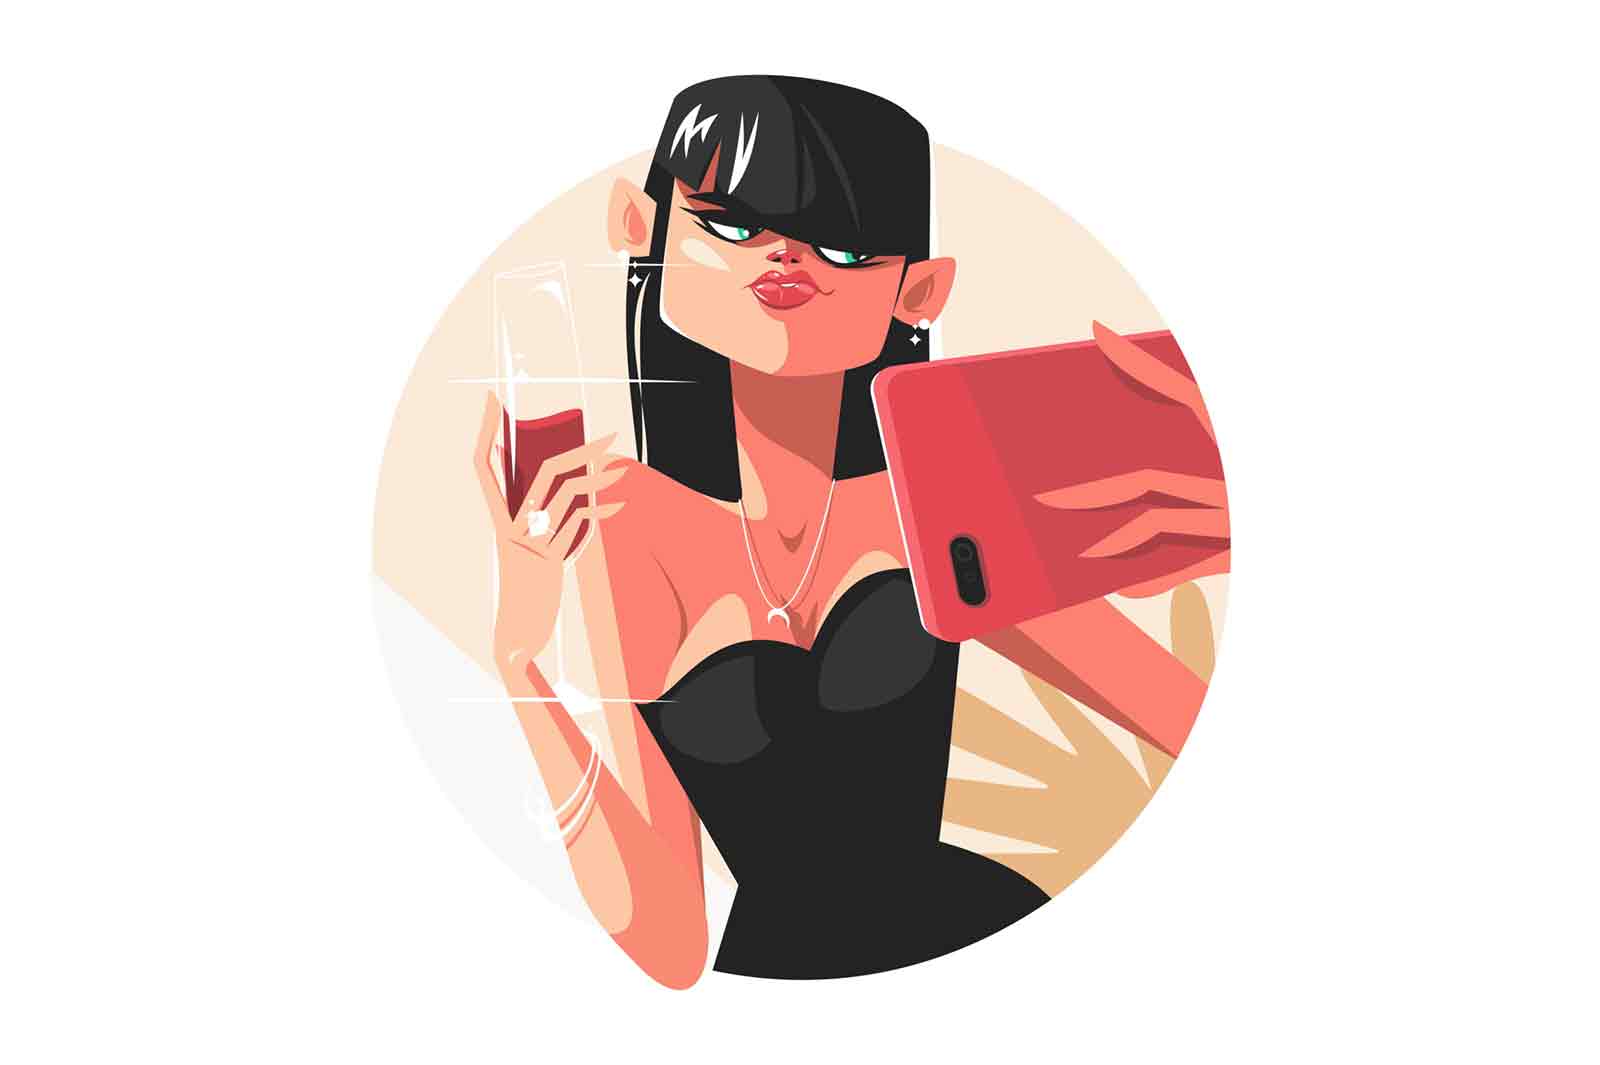 Stylish girl with smartphone vector illustration. Woman with glass of wine flat style. Selfie for social media. Technology and leisure concept. Isolated on white background